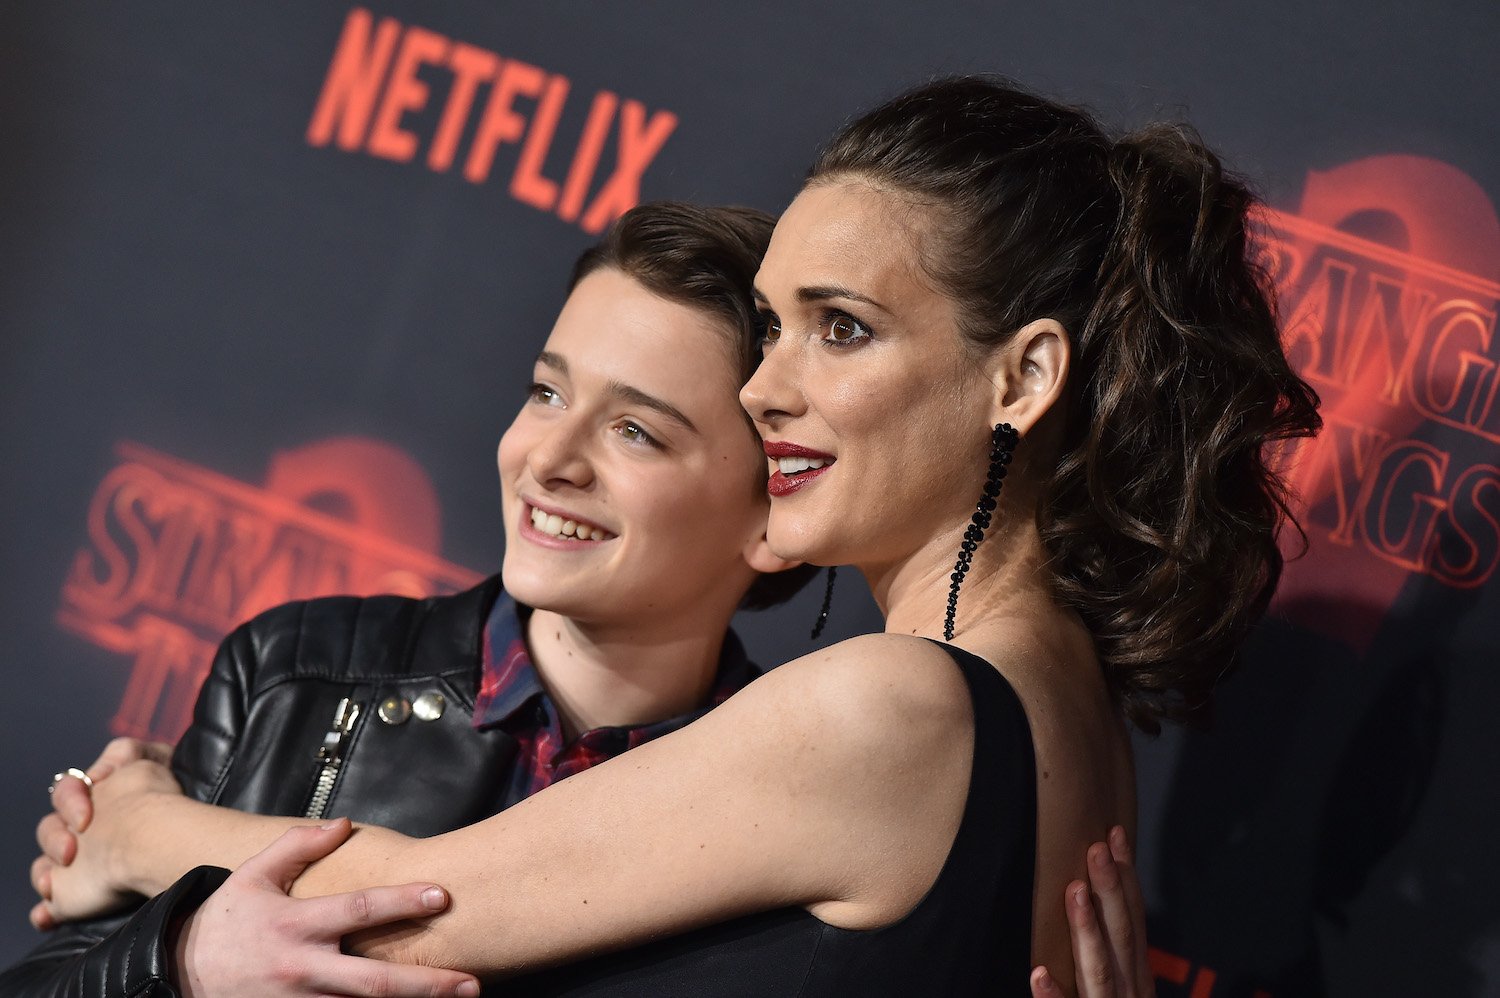 Stranger Things stars Noah Schnapp and Winona Ryder arrive at the season 2 premiere in 2017